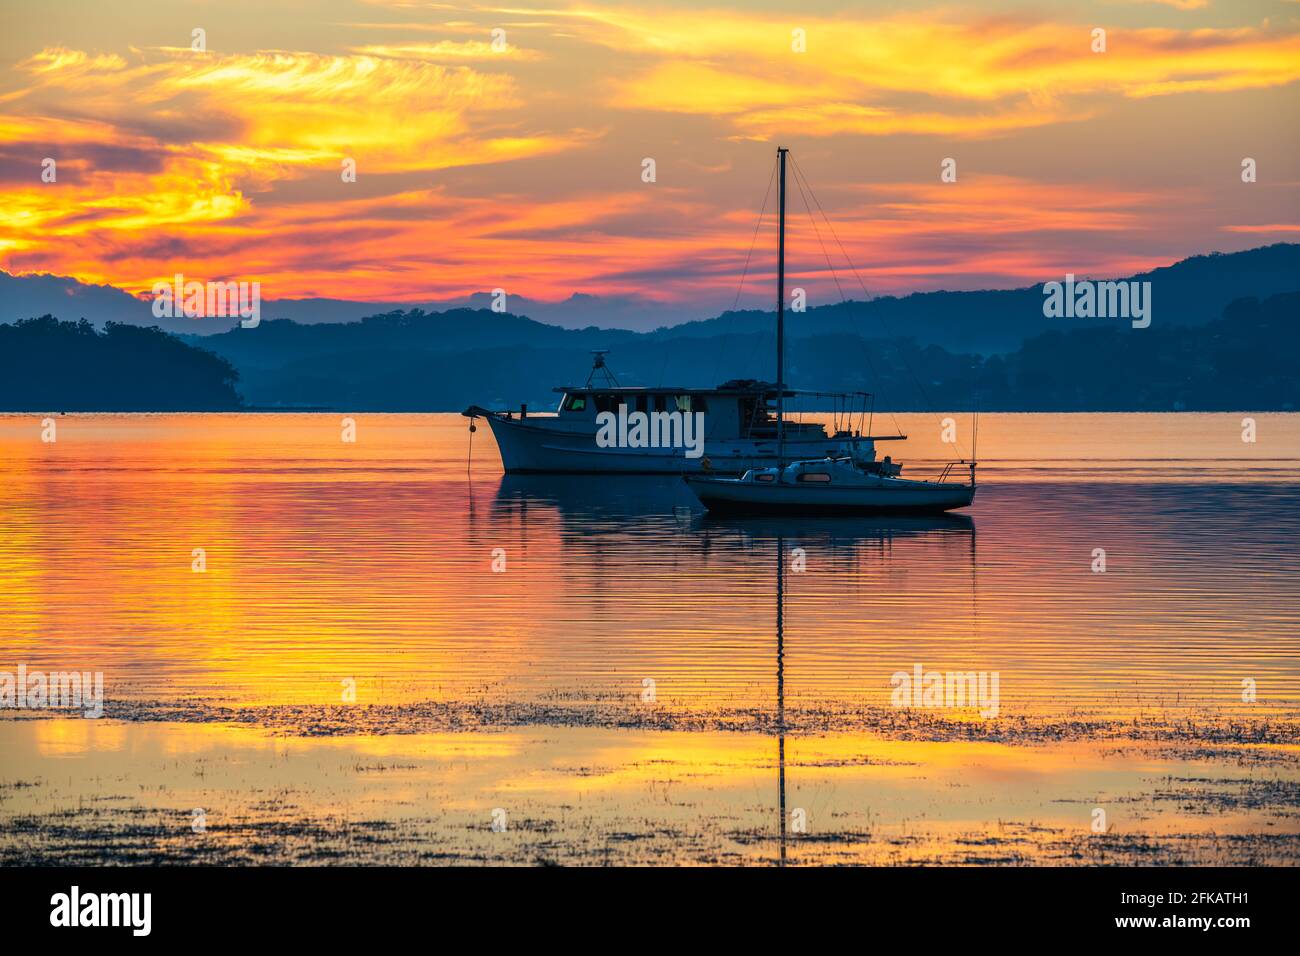 A pretty sunrise with boats and reflections at Koolewong Waterfront on the Central Coast, NSW, Australia. Stock Photo